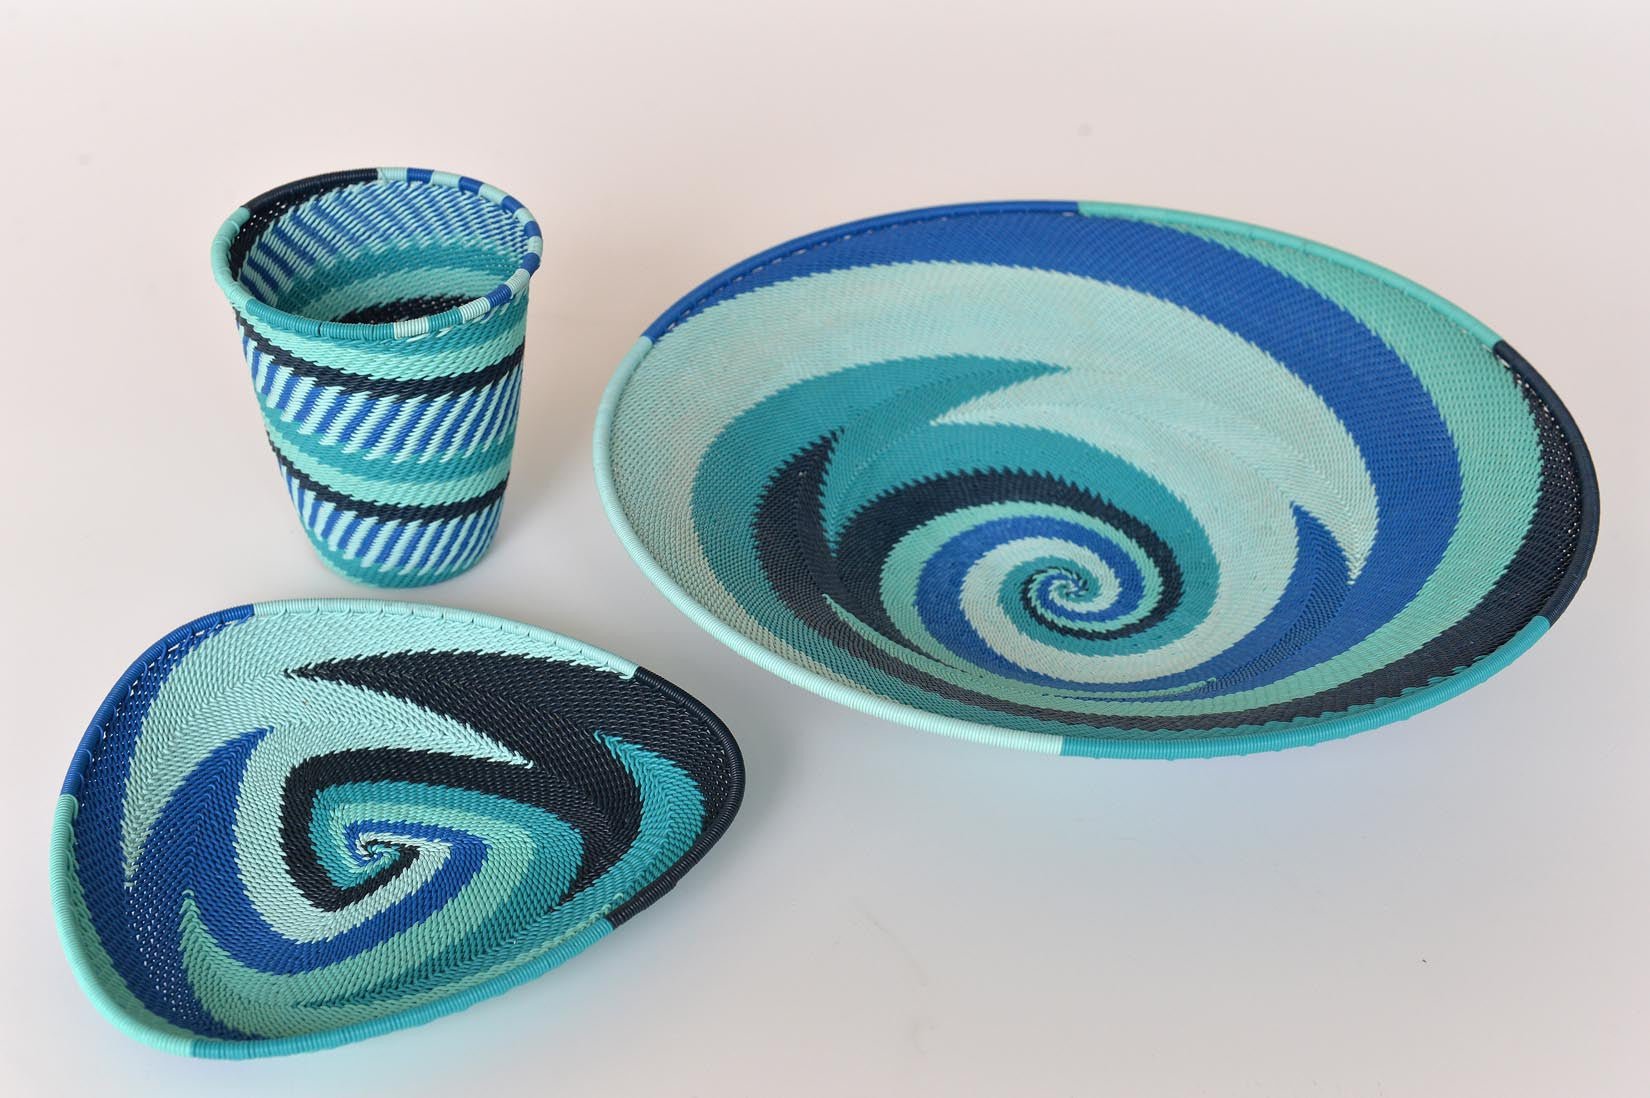 Zulu basket plates and cup - blues & turquoise - Natalia Willmott